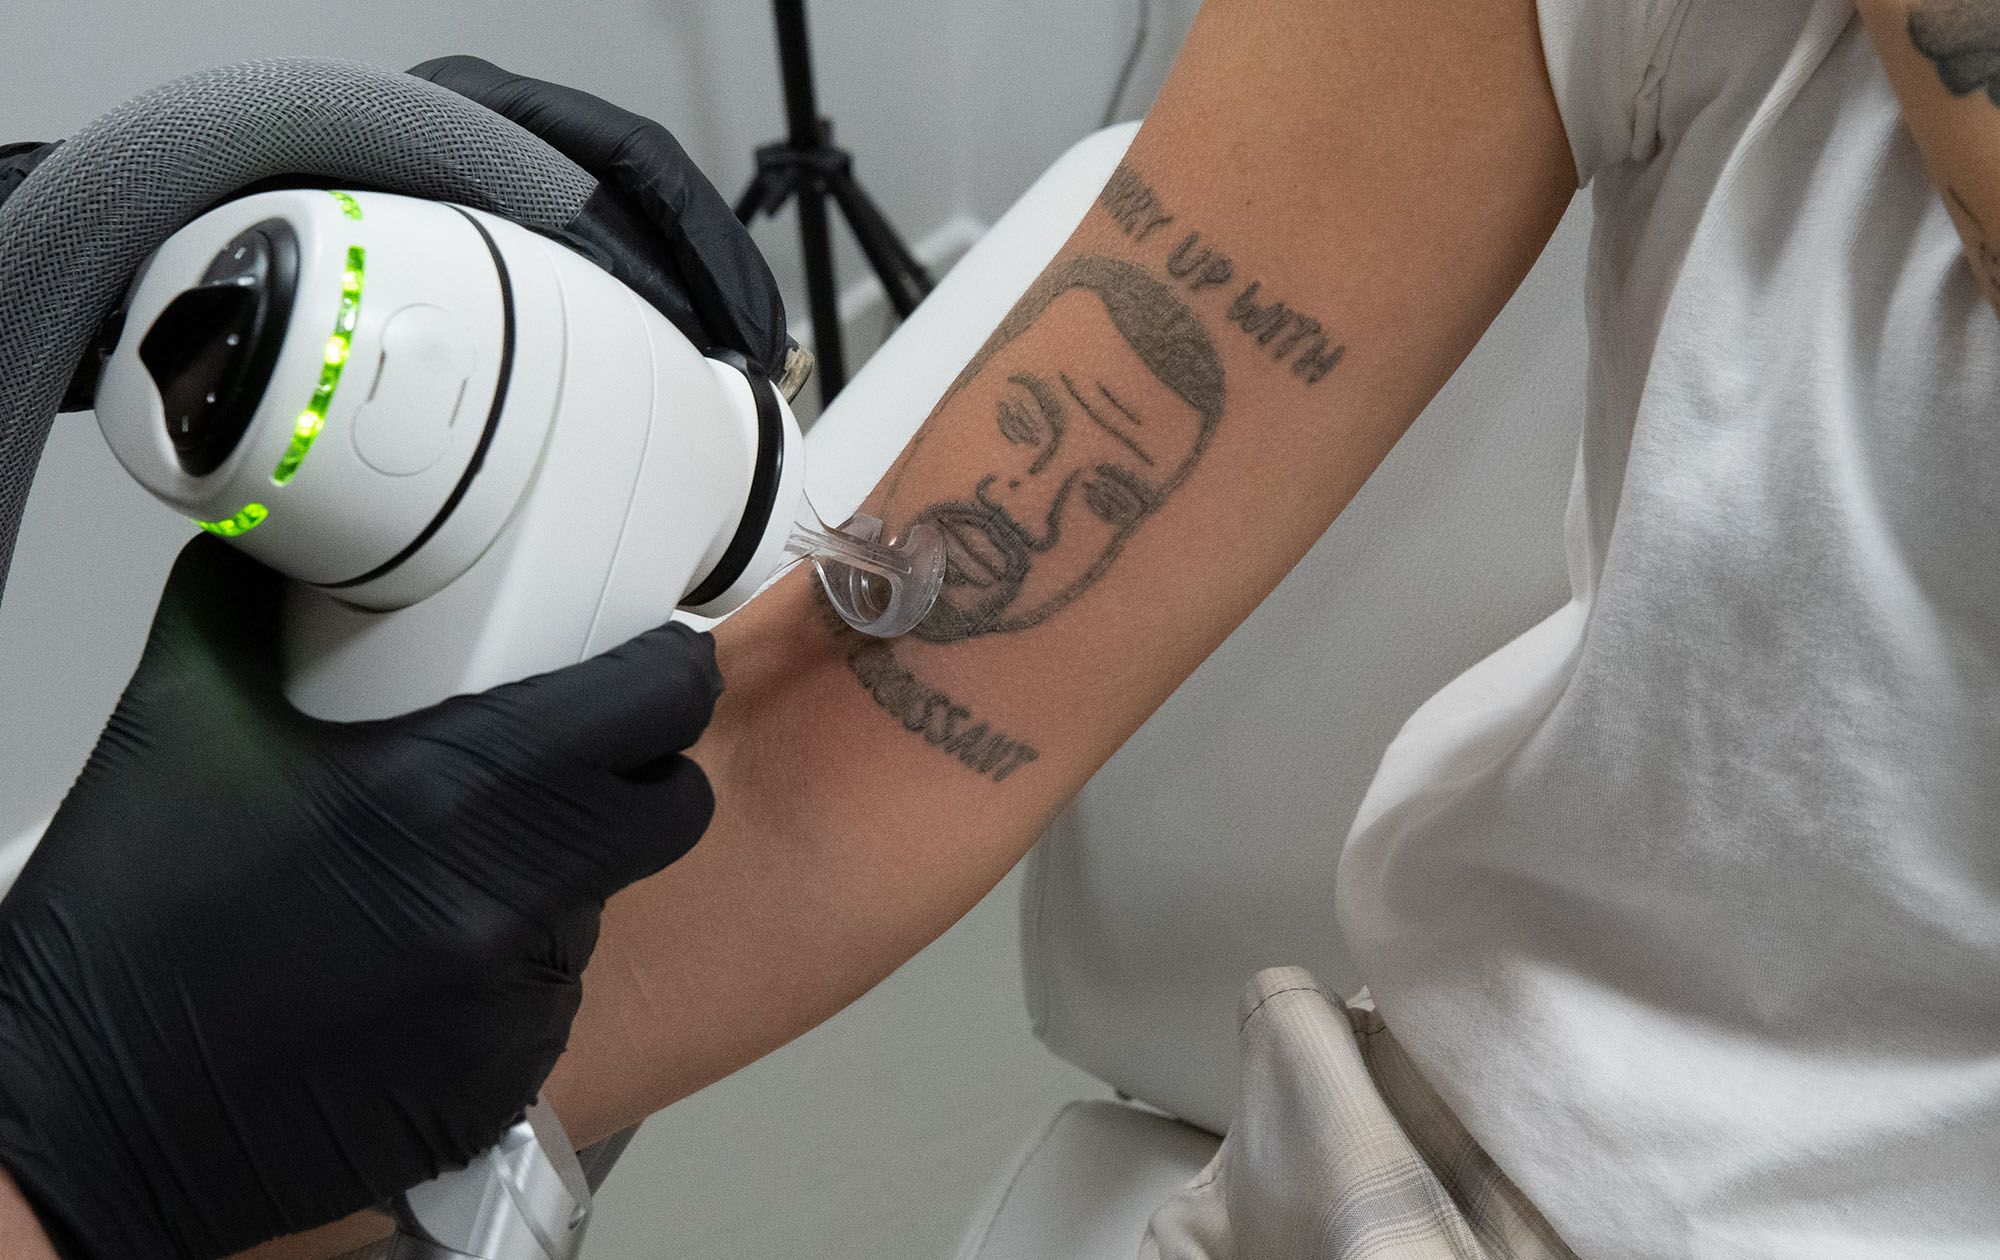 This London tattoo removal studio will laster off your Kanye West tattoo  for free | CNN